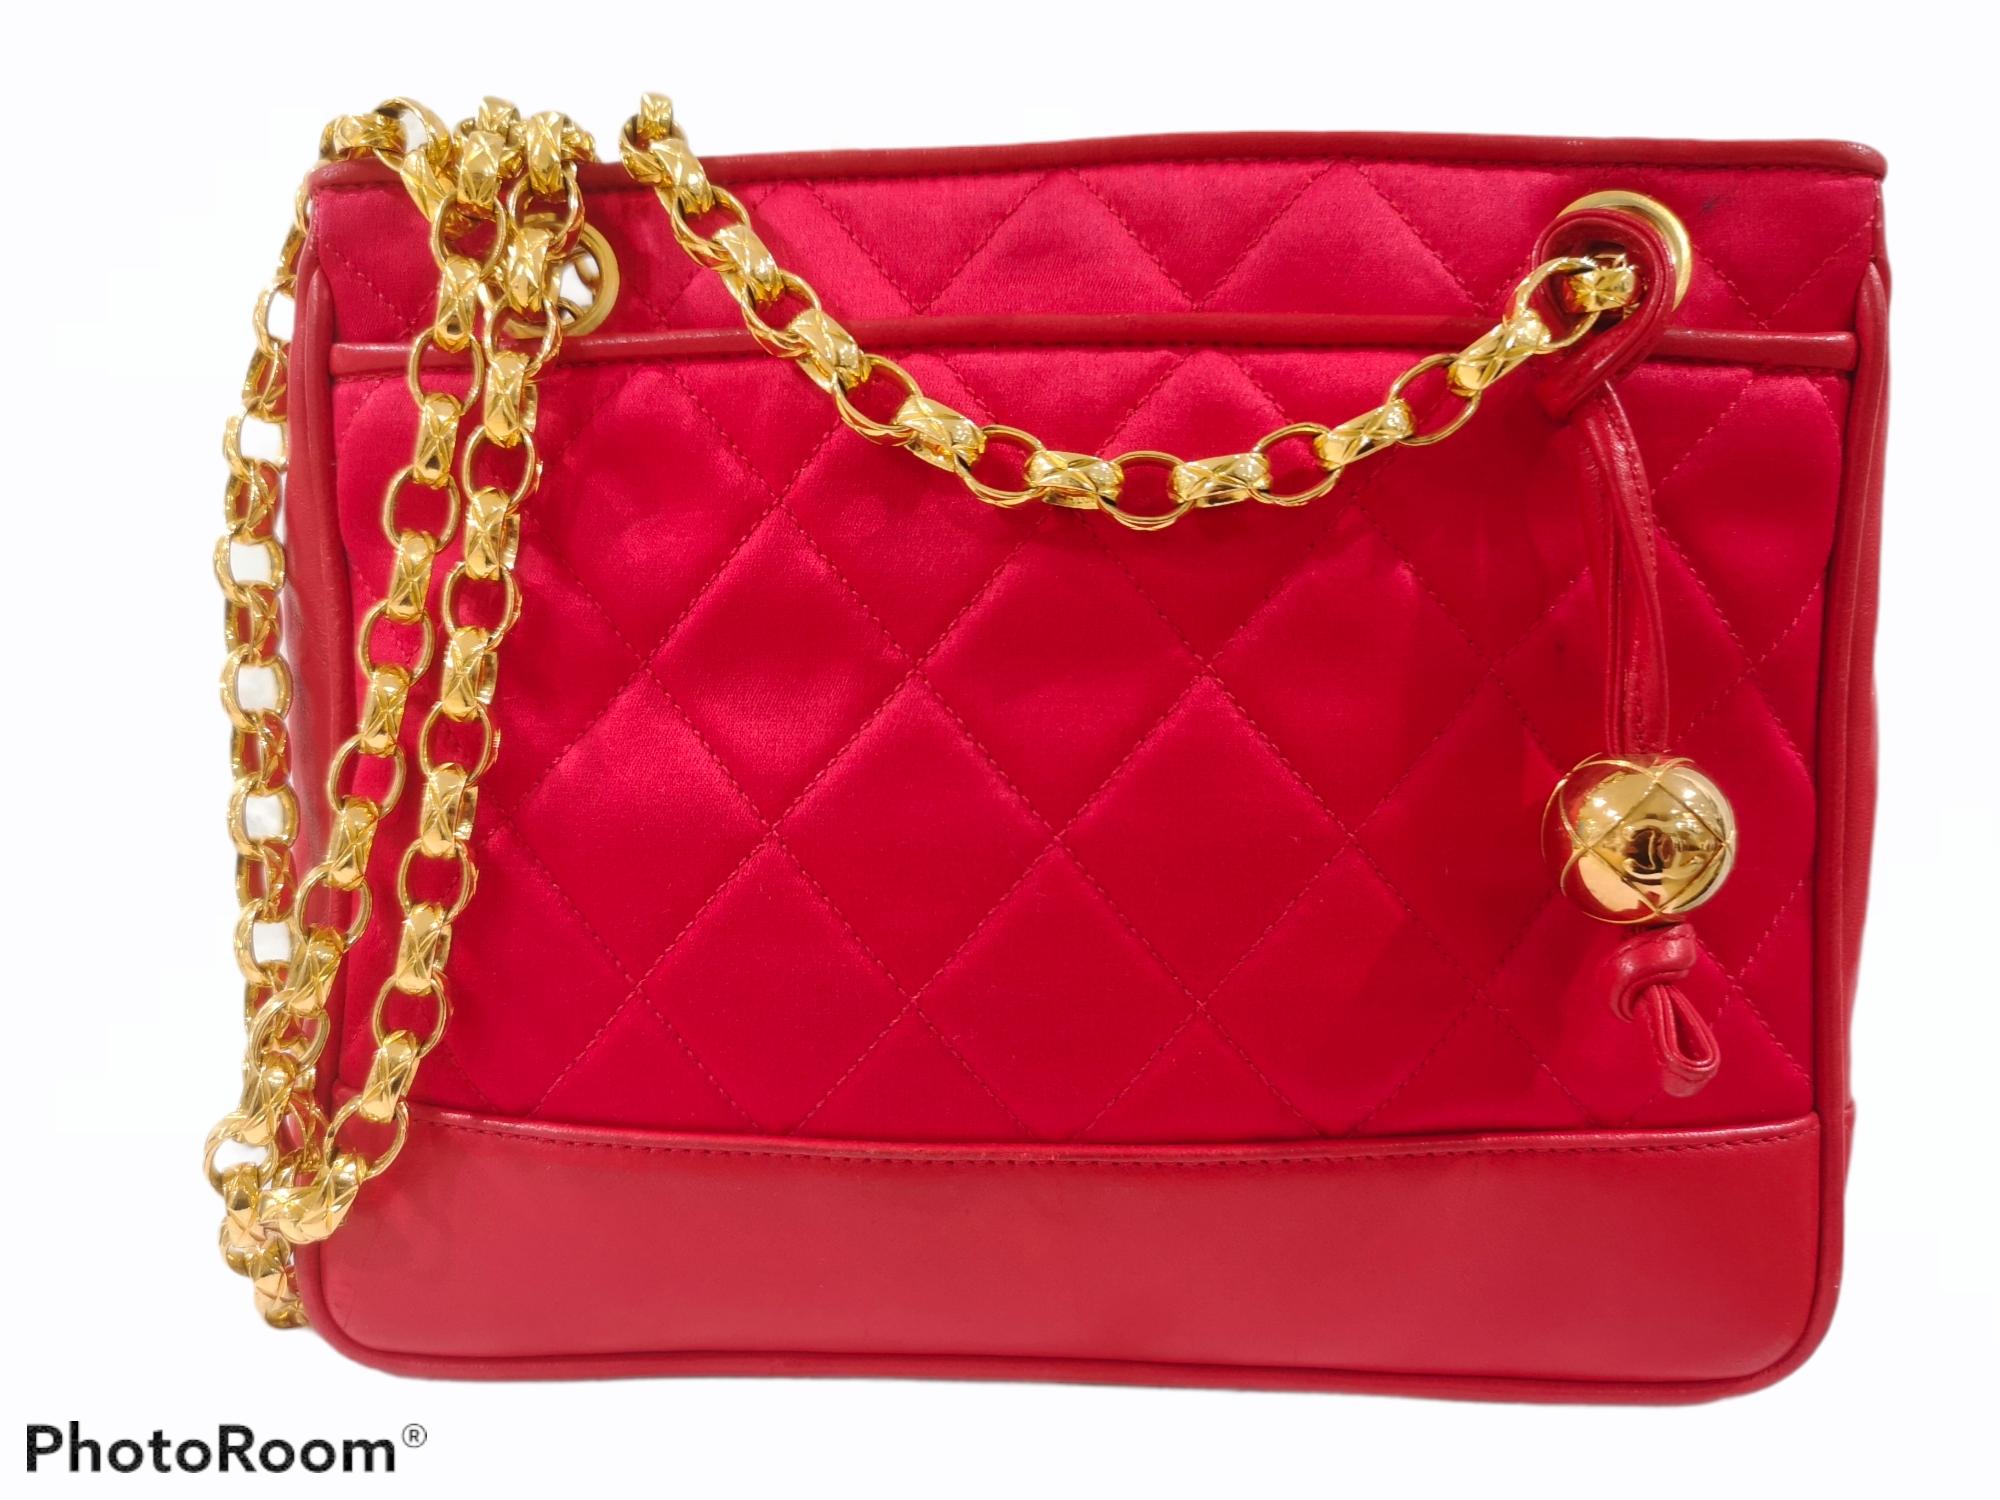 Chanel red leather and fabric shoulder bag
Chanel red leather and fabric with two different shoulder straps. One made of red leather, the other one is made of gold tone chain
On one side it shows an ink spot 
check carefully pics
